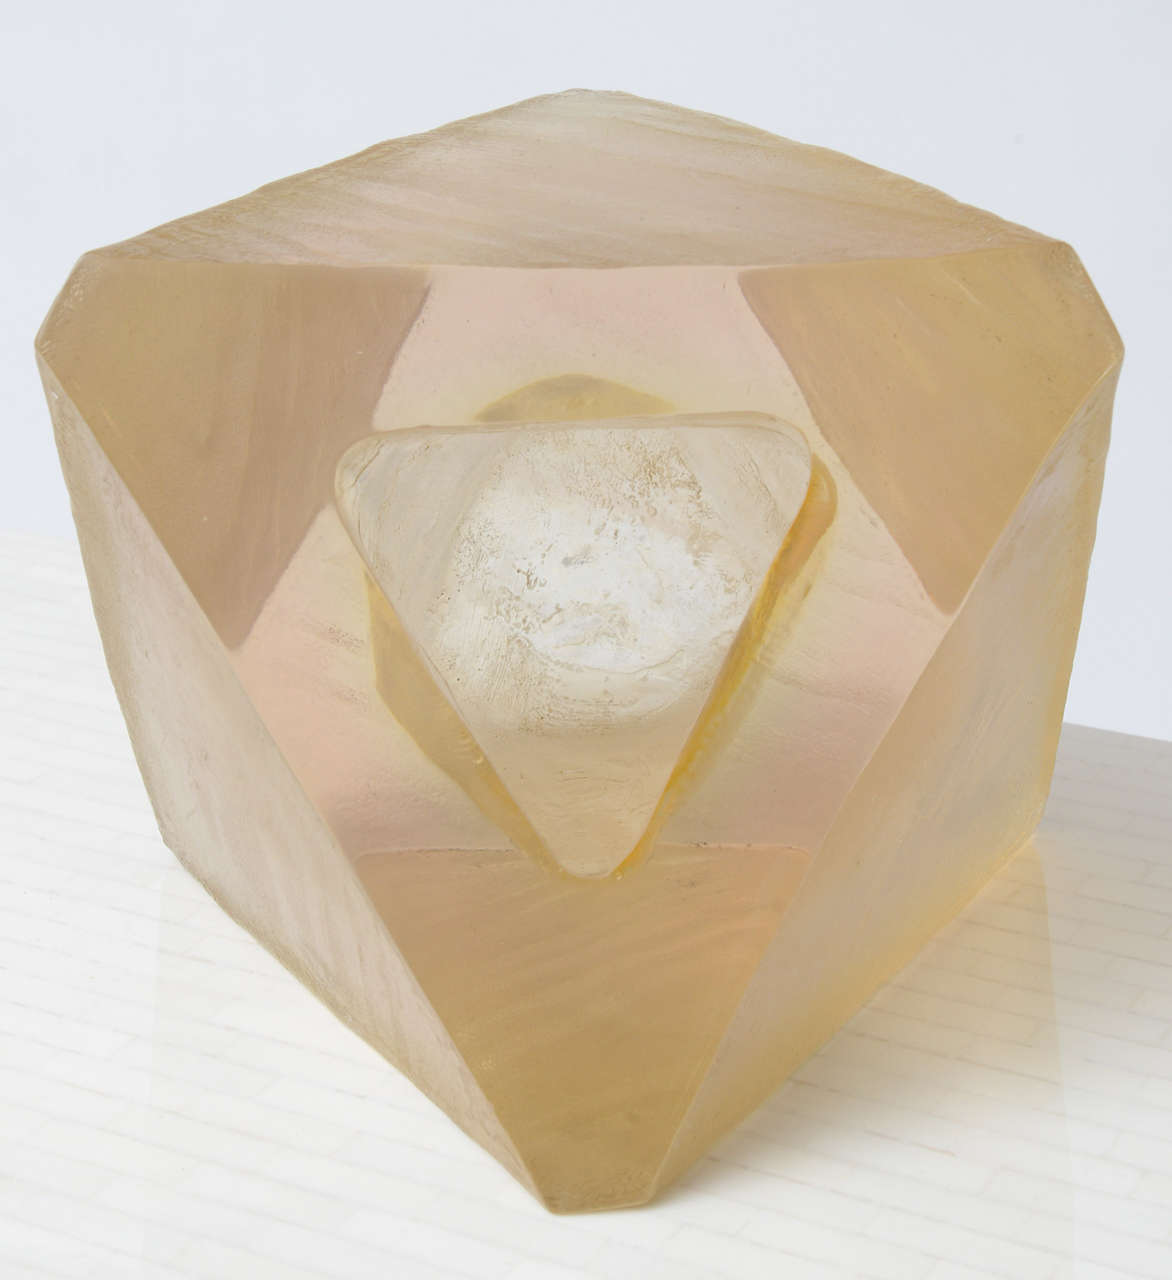 Unsigned 70's polyhedral sculpture. Rough textured resin sides, polished front with hollowed out triangular form. Original owner's heirs could only confirm it being purchased circa 1970.